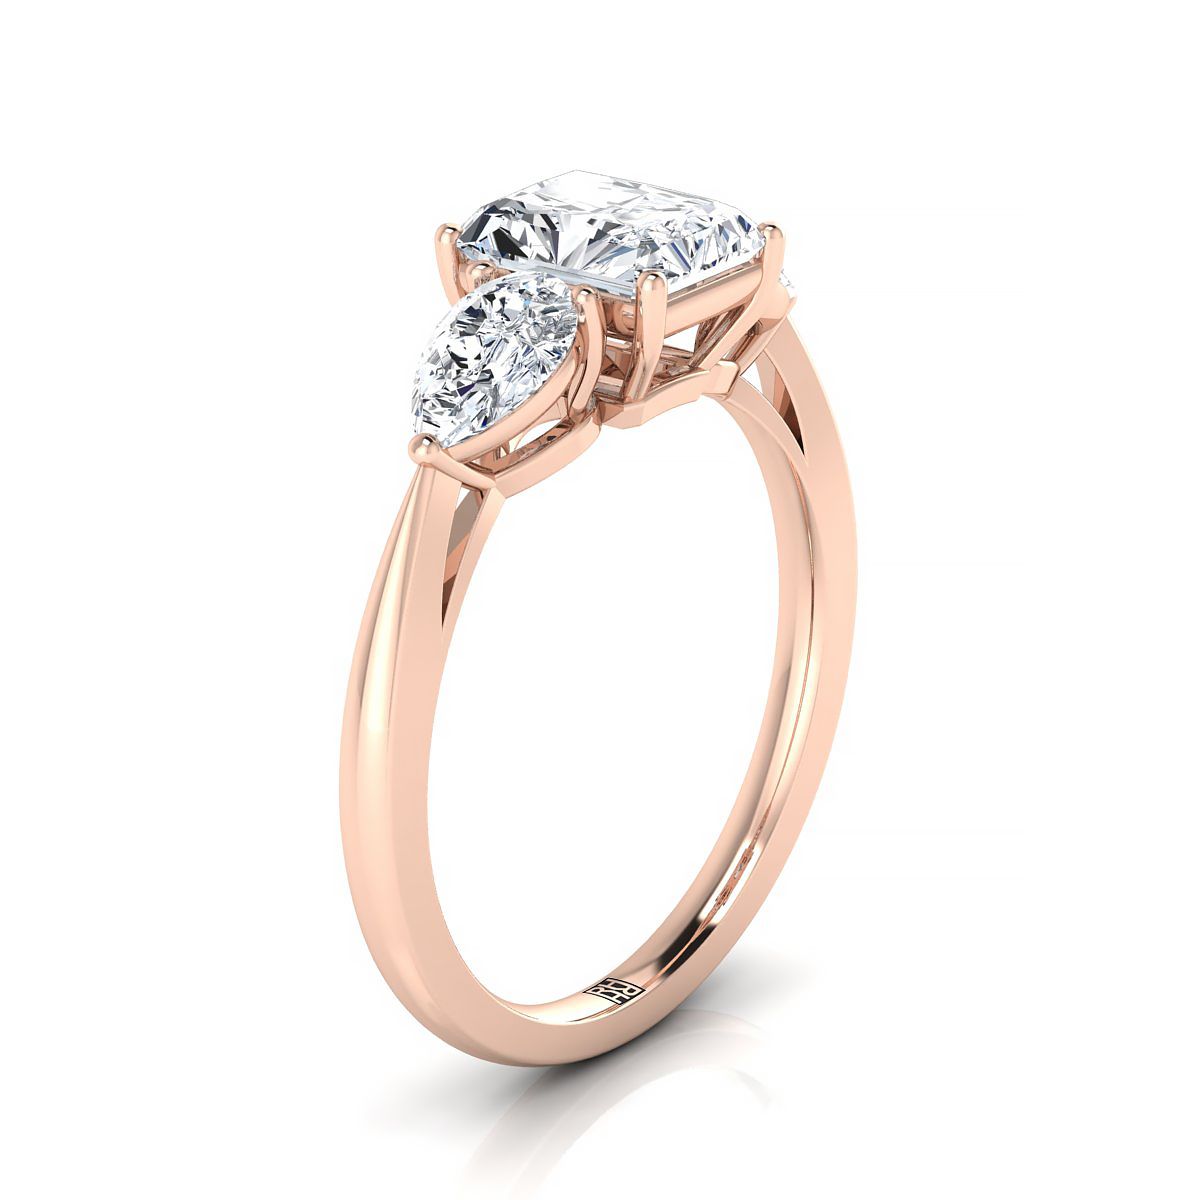 14K Rose Gold Radiant Cut Center Diamond Perfectly Matched Pear Shaped Three Diamond Engagement Ring -7/8ctw